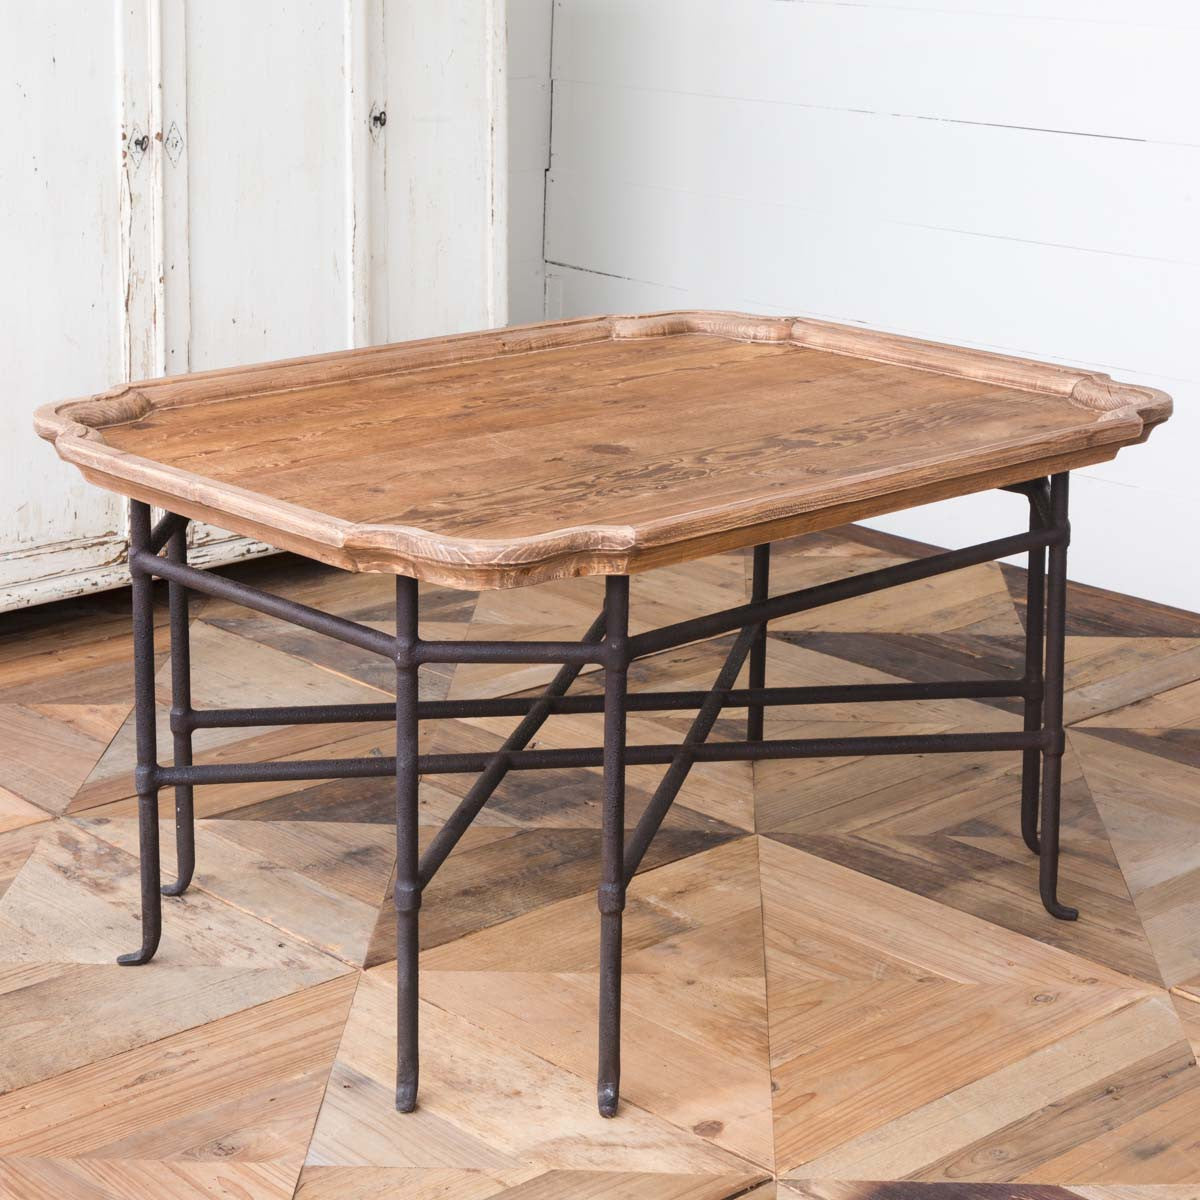 Iron Coffee Tables & Bases